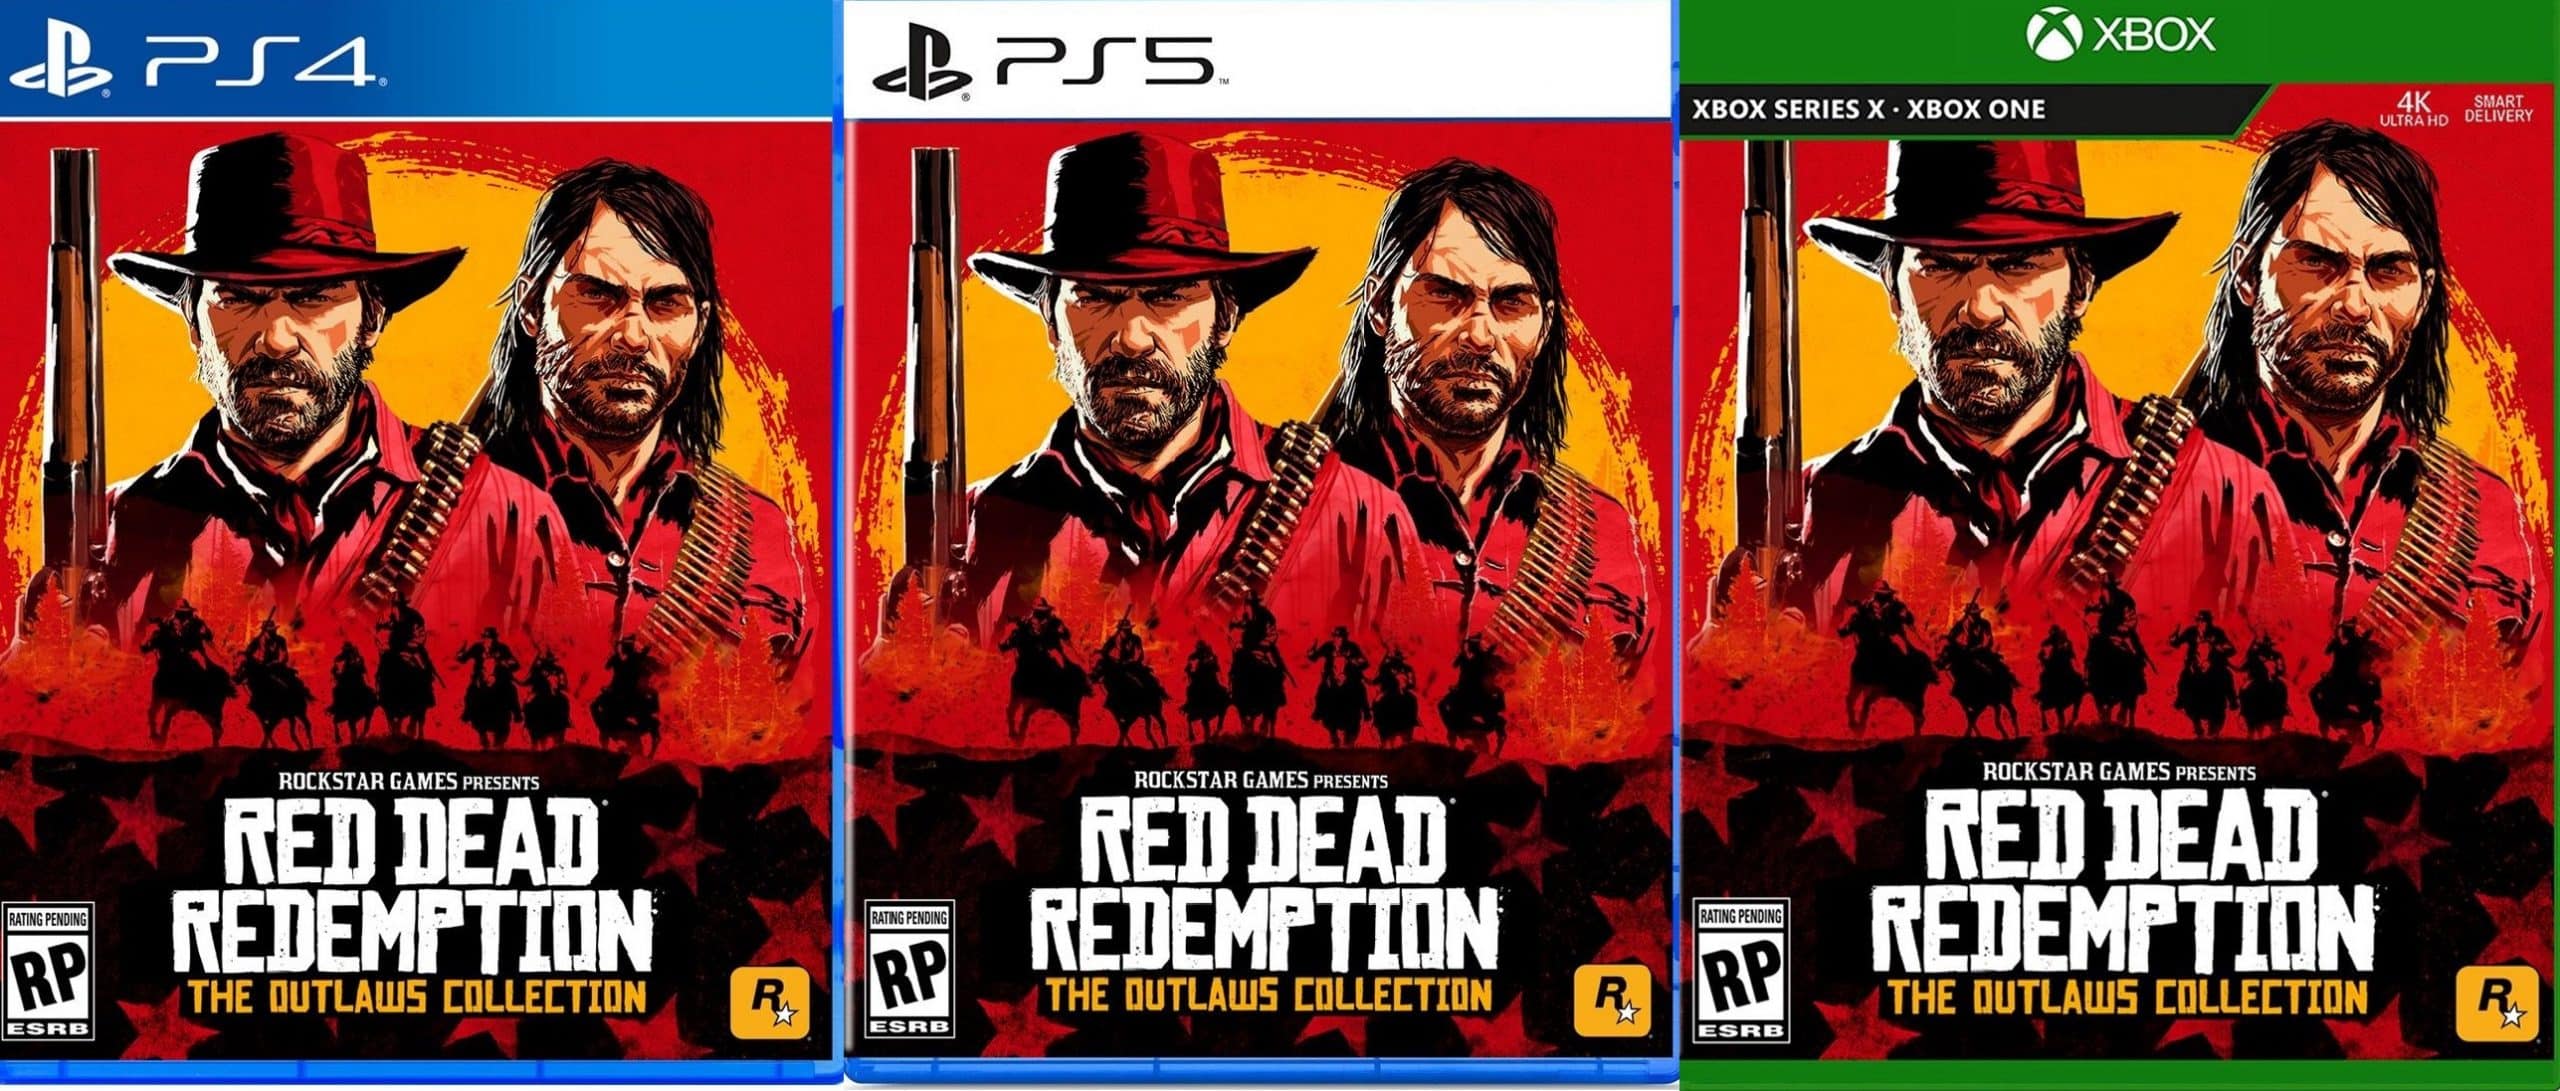 Red dead series. Rdr 2 Xbox one. Xbox one Red Dead Redemption 2. Red Dead Redemption 1. Red Dead Redemption 2 Xbox.